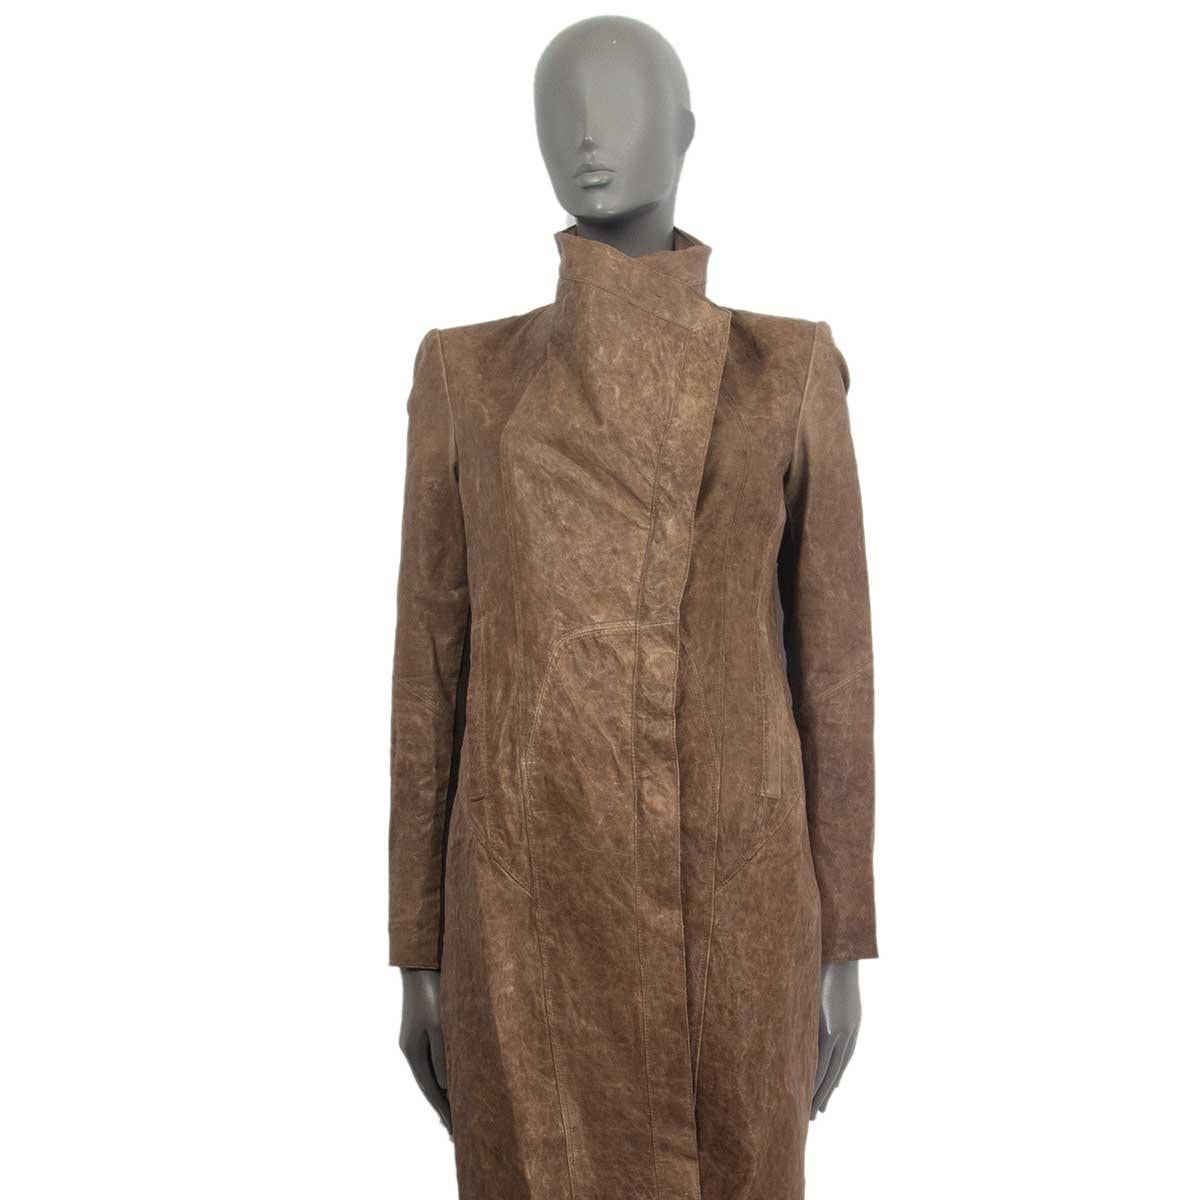 100% authentic Helmut Lang distressed leather coat in dried tobacco sheep leather (100%). With a draped collar, seam details, two slash pockets and with a knitted part along the inside of the sleeves. Lined in taupe cotton (100%). Closes with